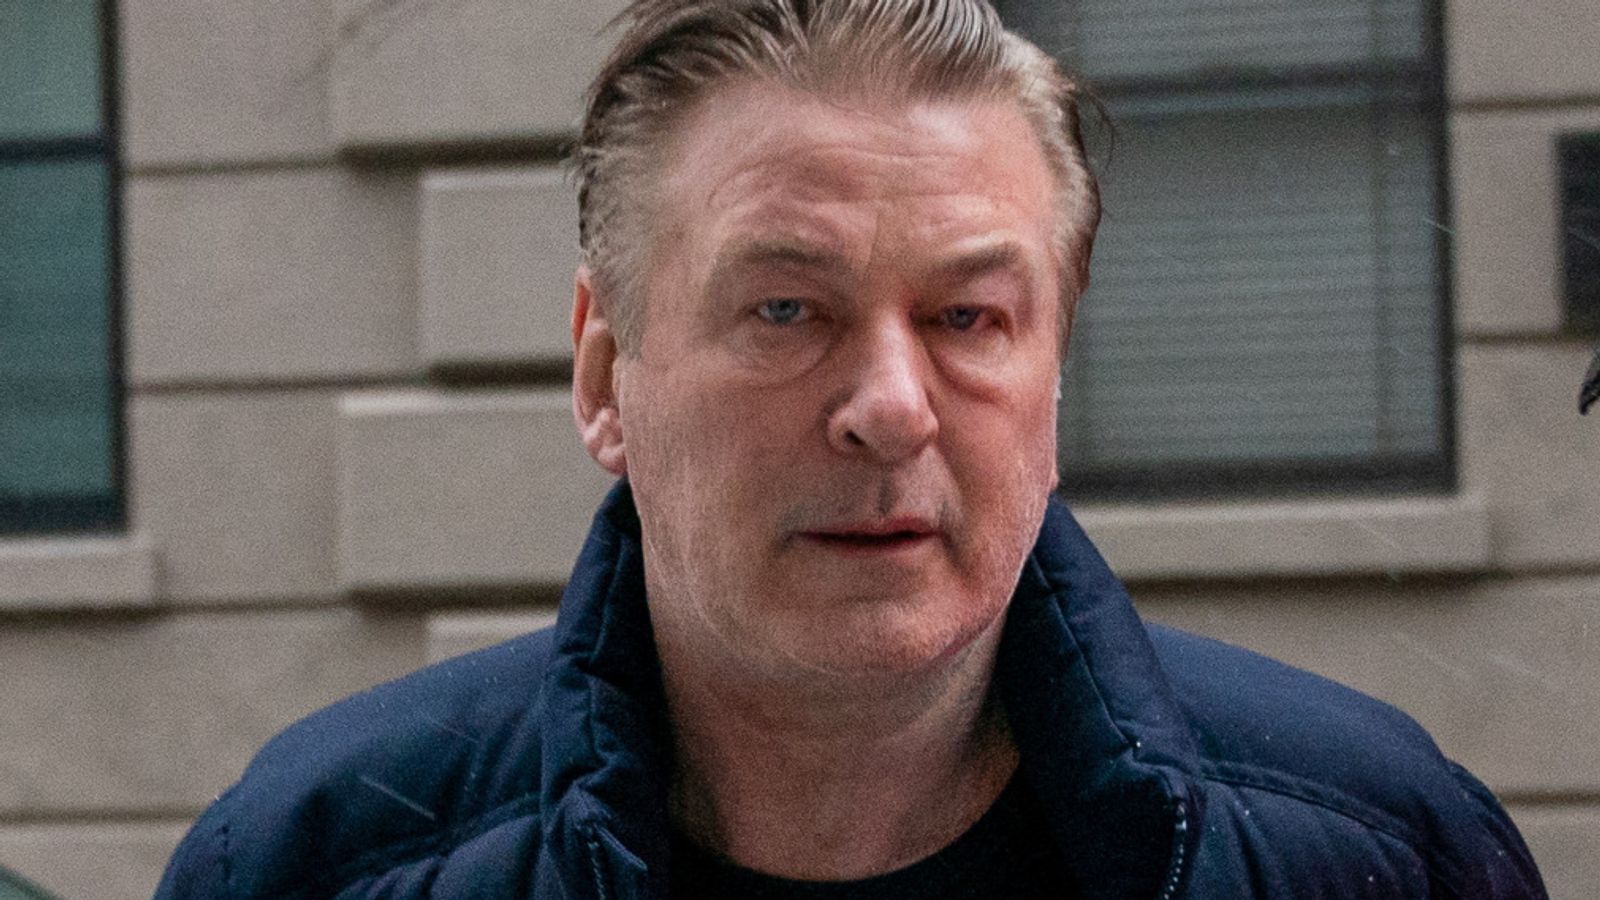 Alec Baldwin to be arraigned after star charged again over Halyna Hutchins death on Rust set